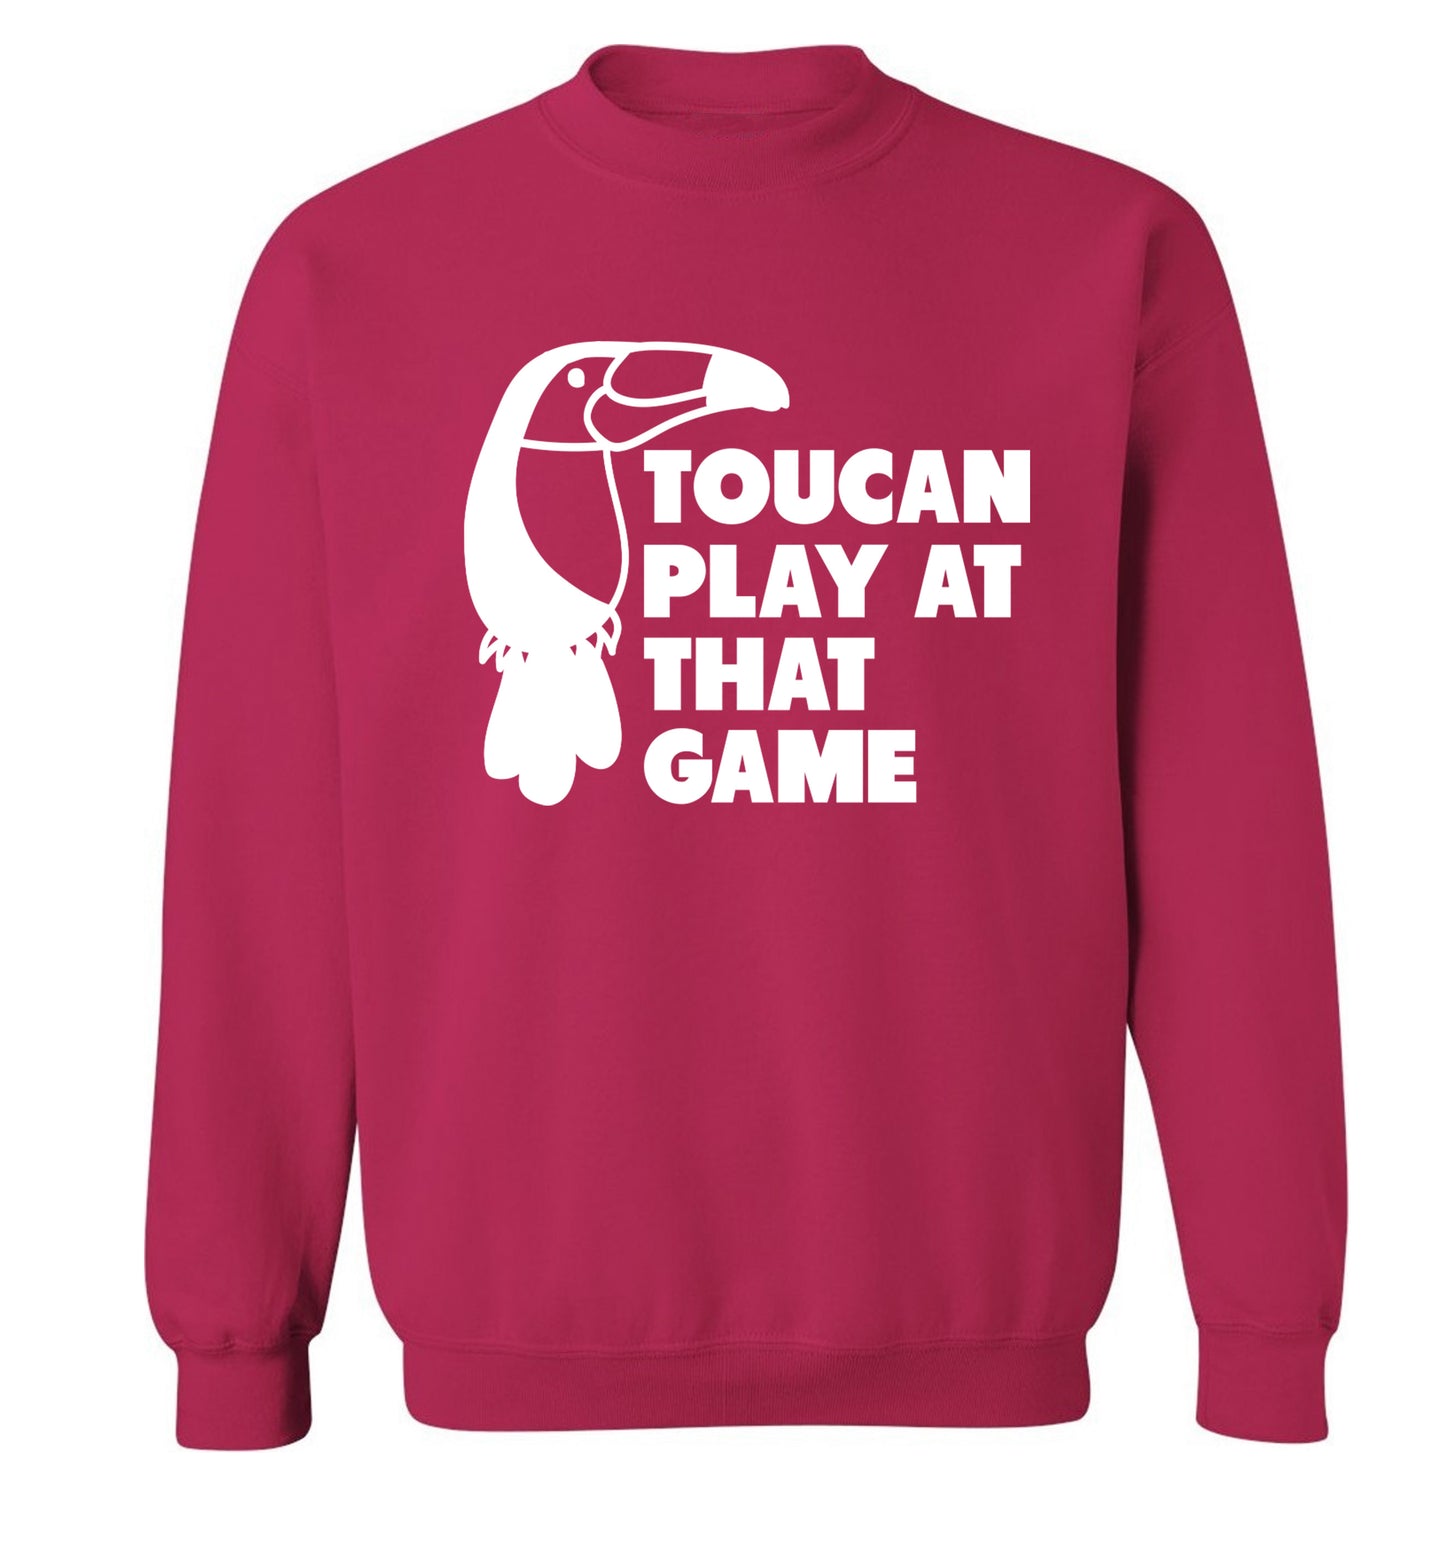 Toucan play at that game Adult's unisex pink Sweater 2XL